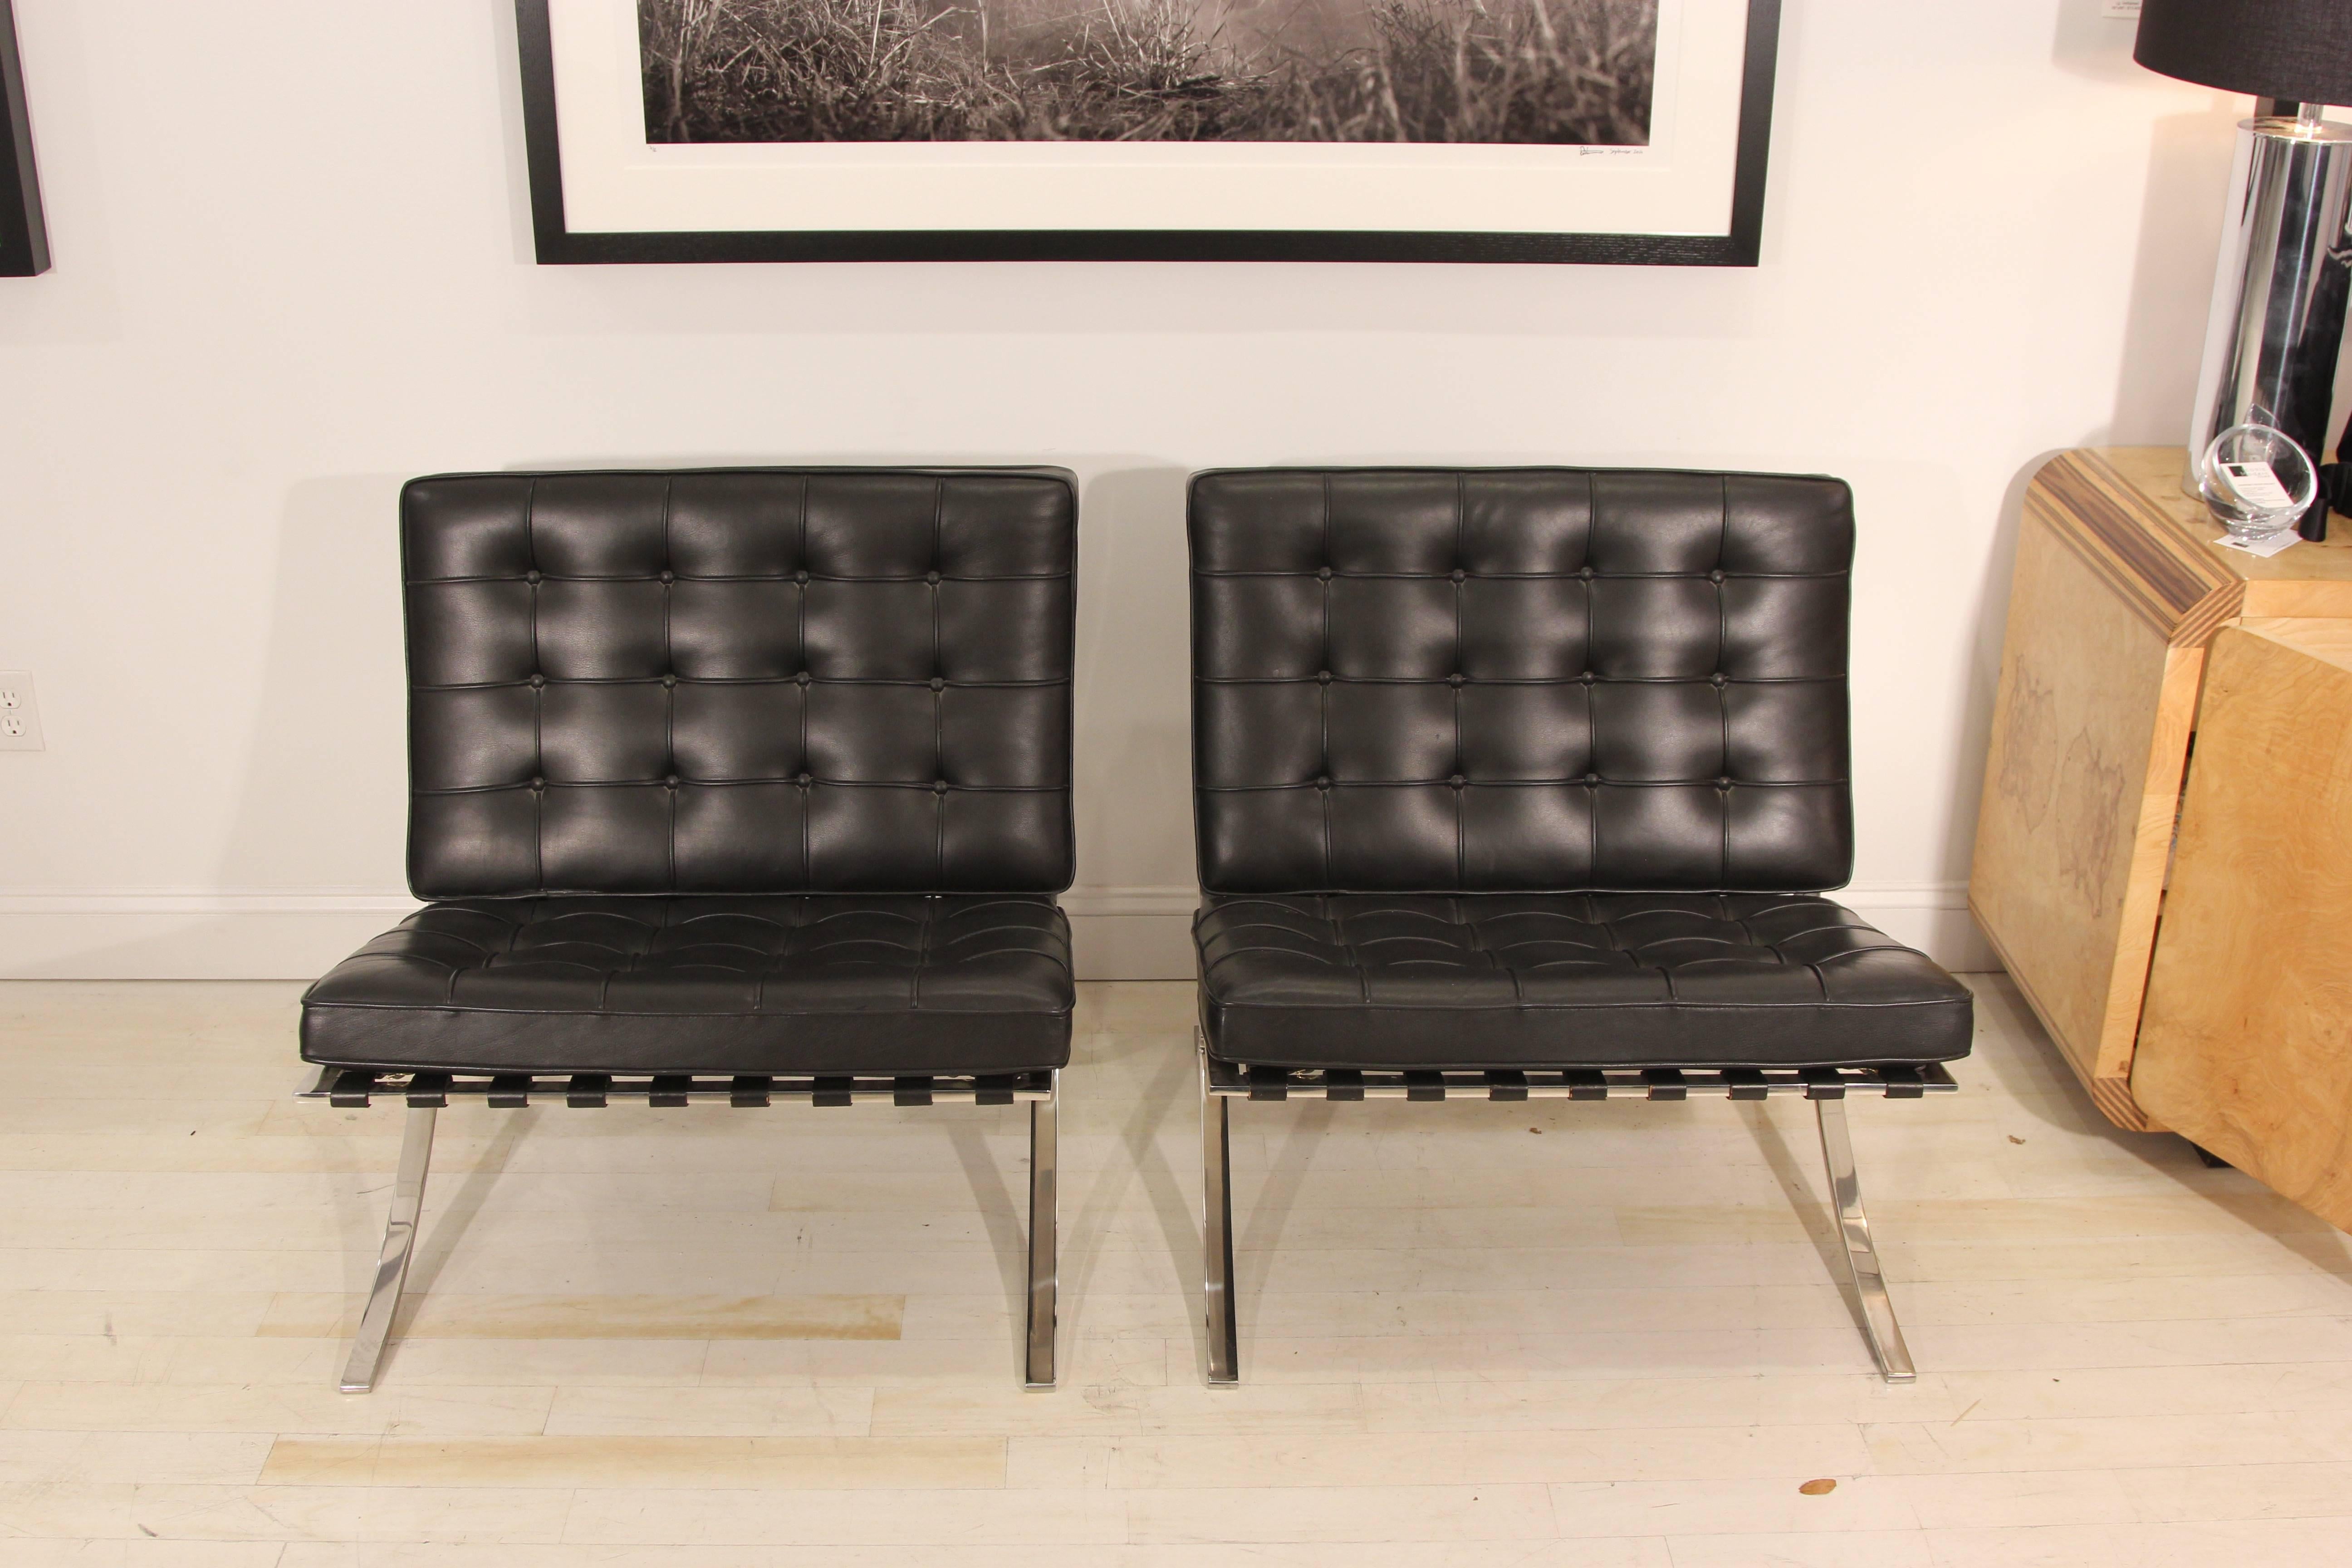 Incredible pair of Mies van der Rohe Barcelona chairs in black leather. It doesn't get much more iconic than these. In phenomenal condition, beautiful black leather. Heavy chrome frames in excellent condition. Straps in excellent condition.